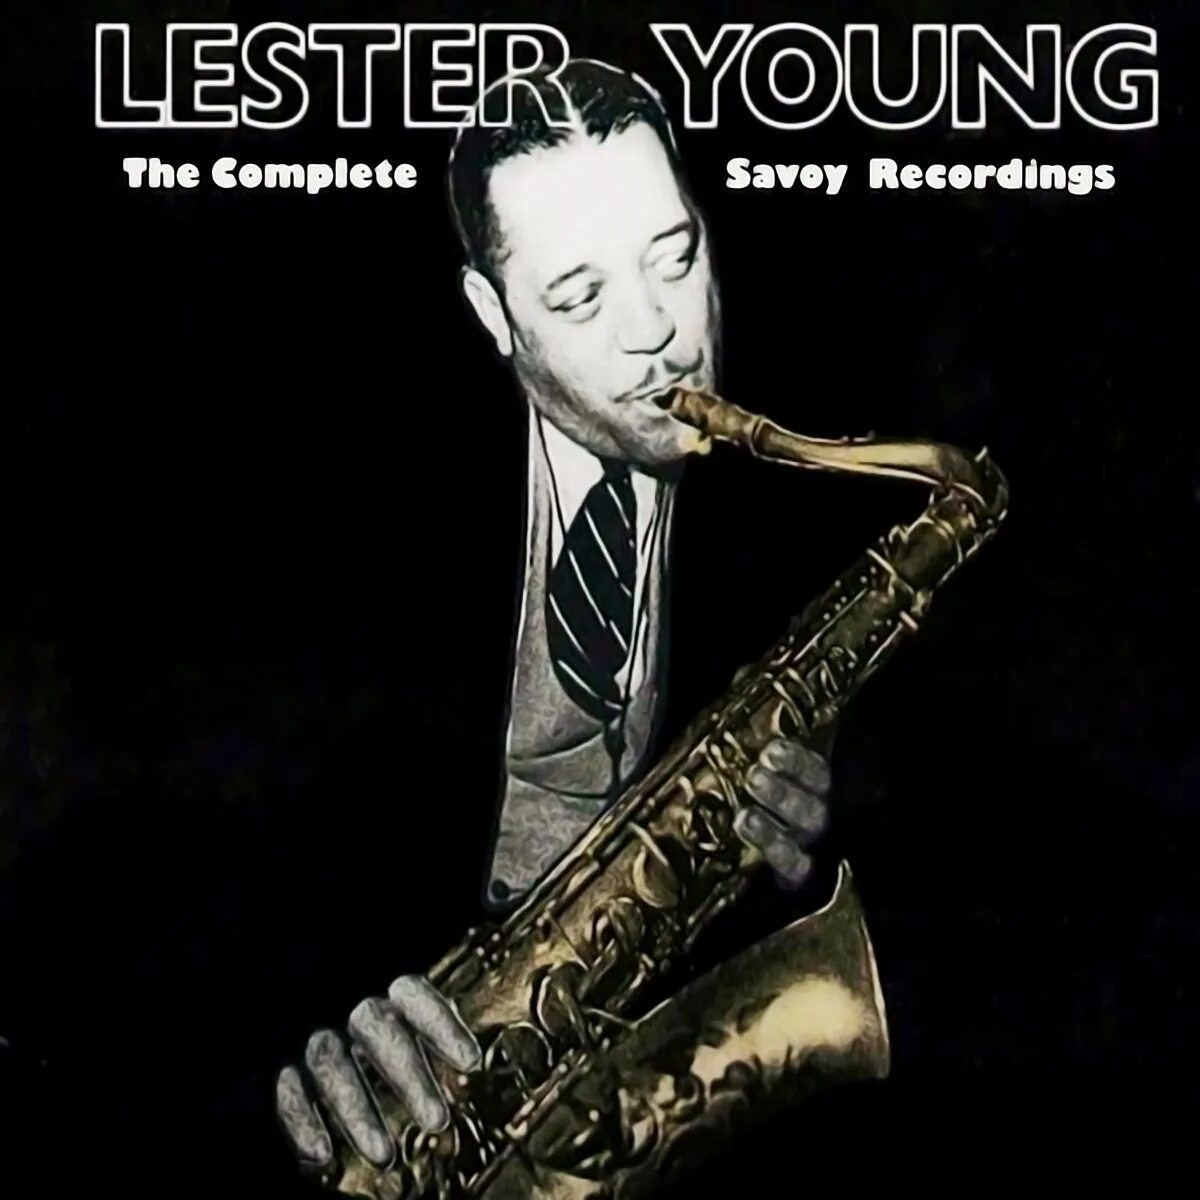 The Savoy recordings (cd2) (1955). The complete Lester young Studio sessions on Verve. Hooray for Lester young session Disc.